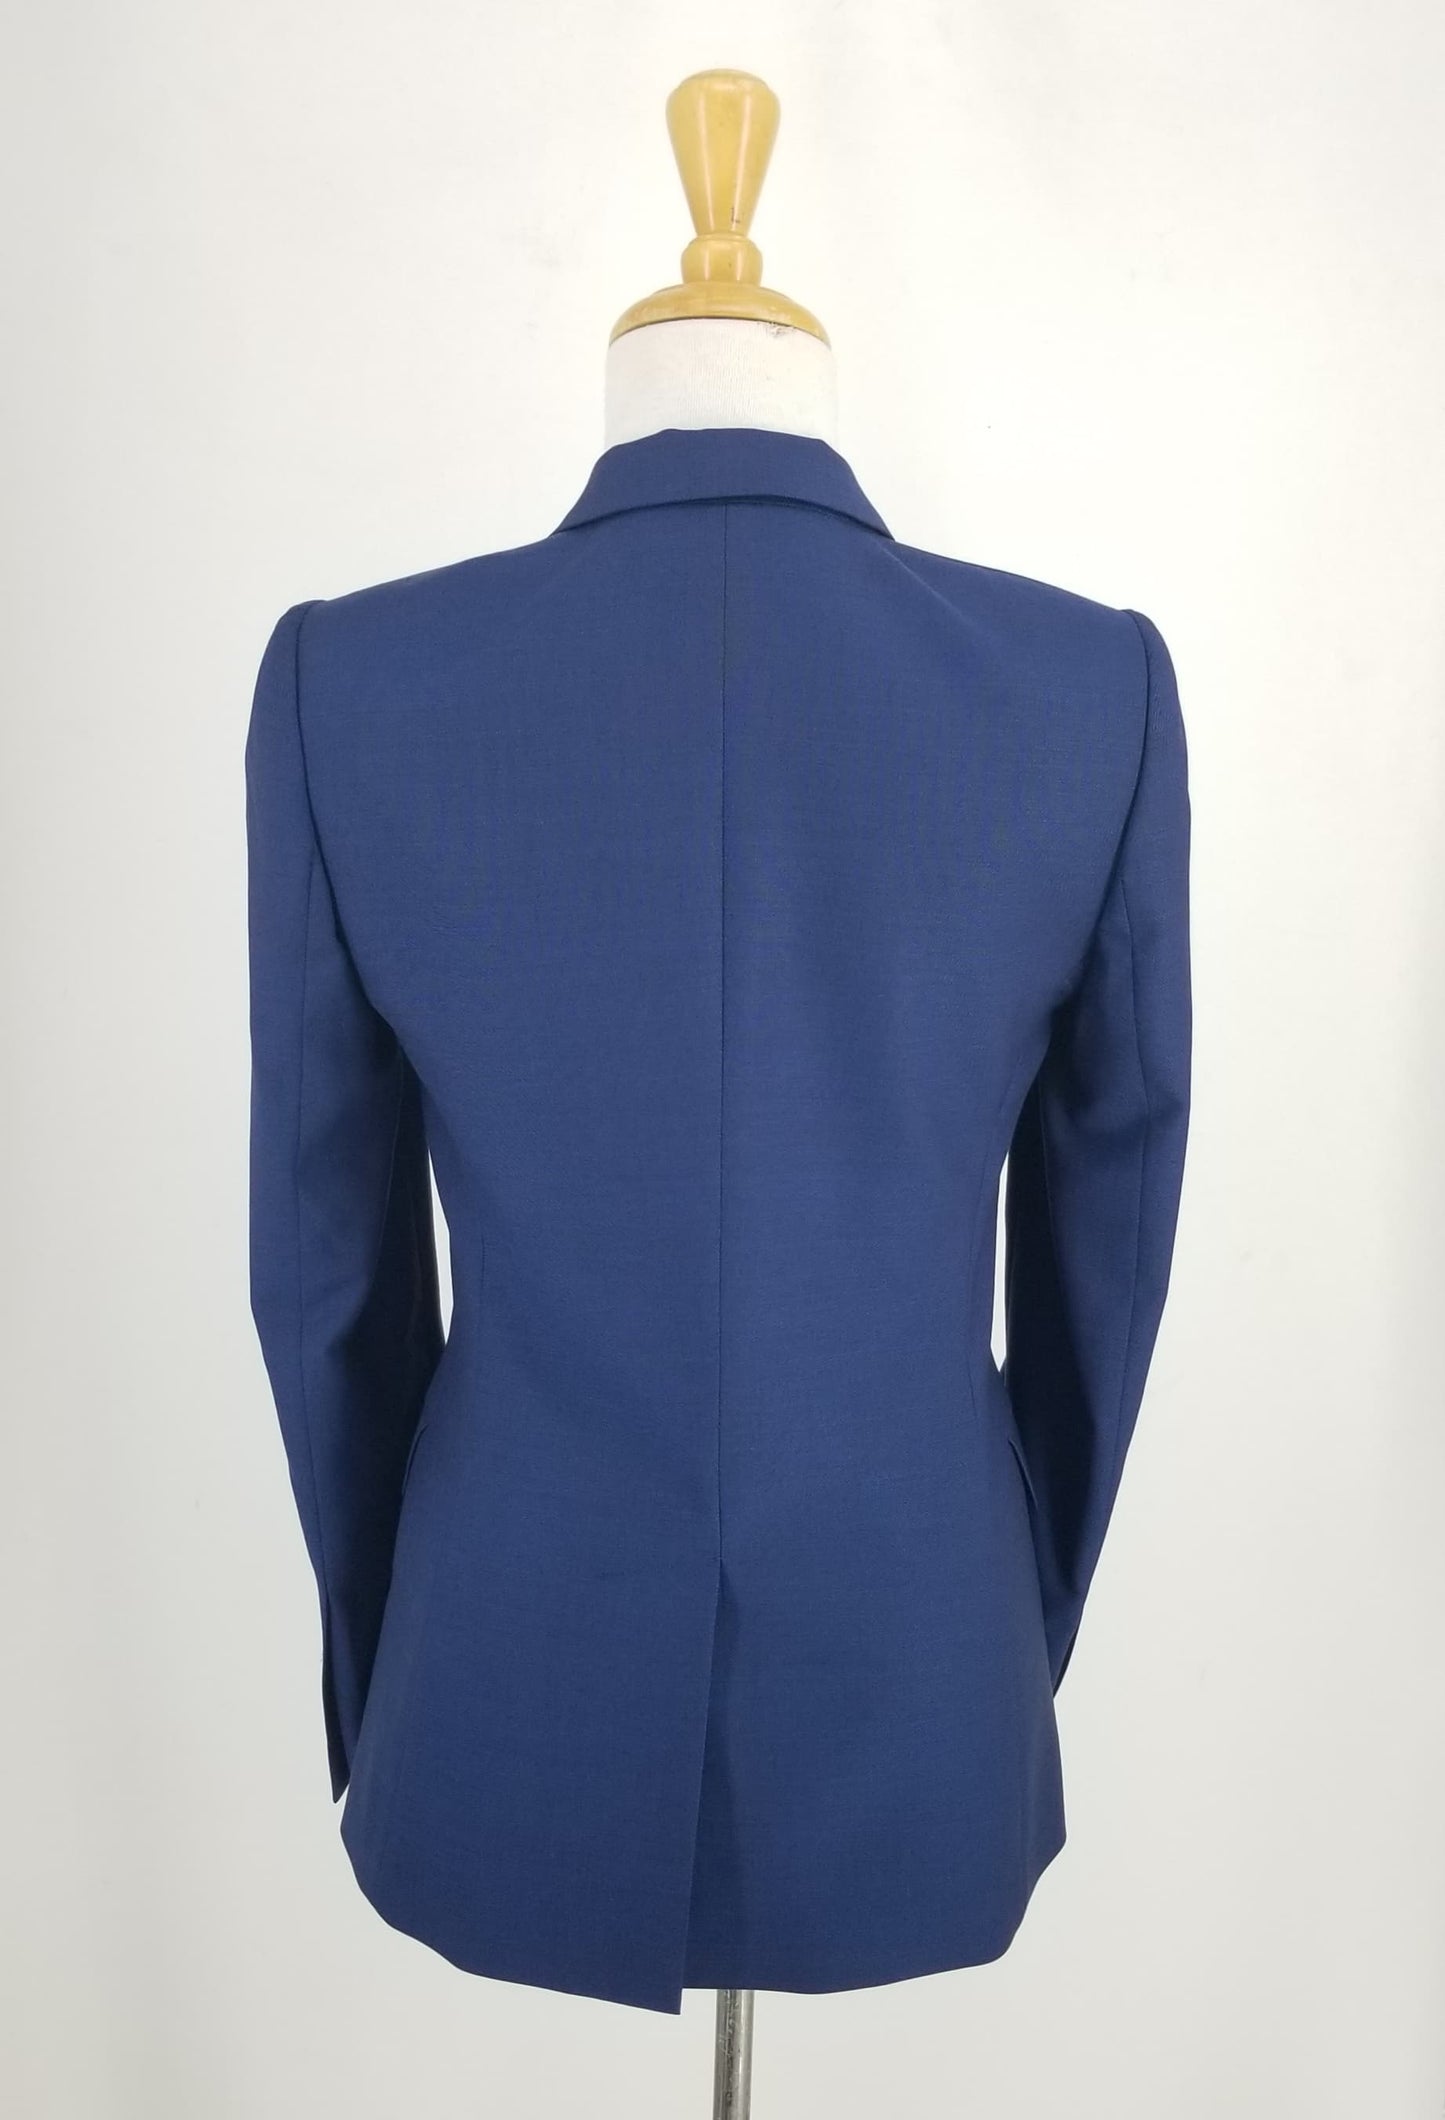 Authentic Judith & Charles Royal Blue One Button Blazer